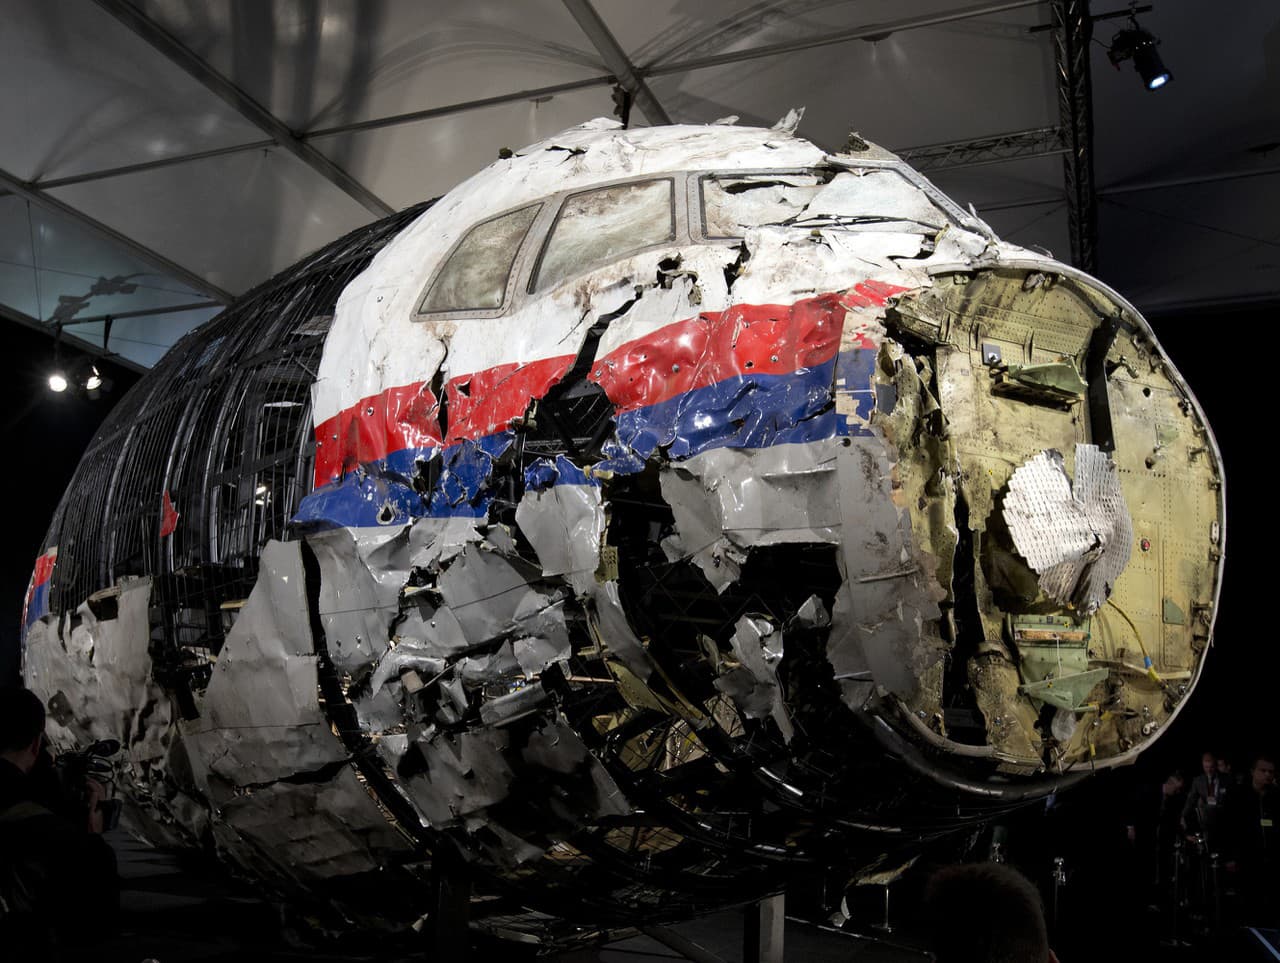 Let MH17